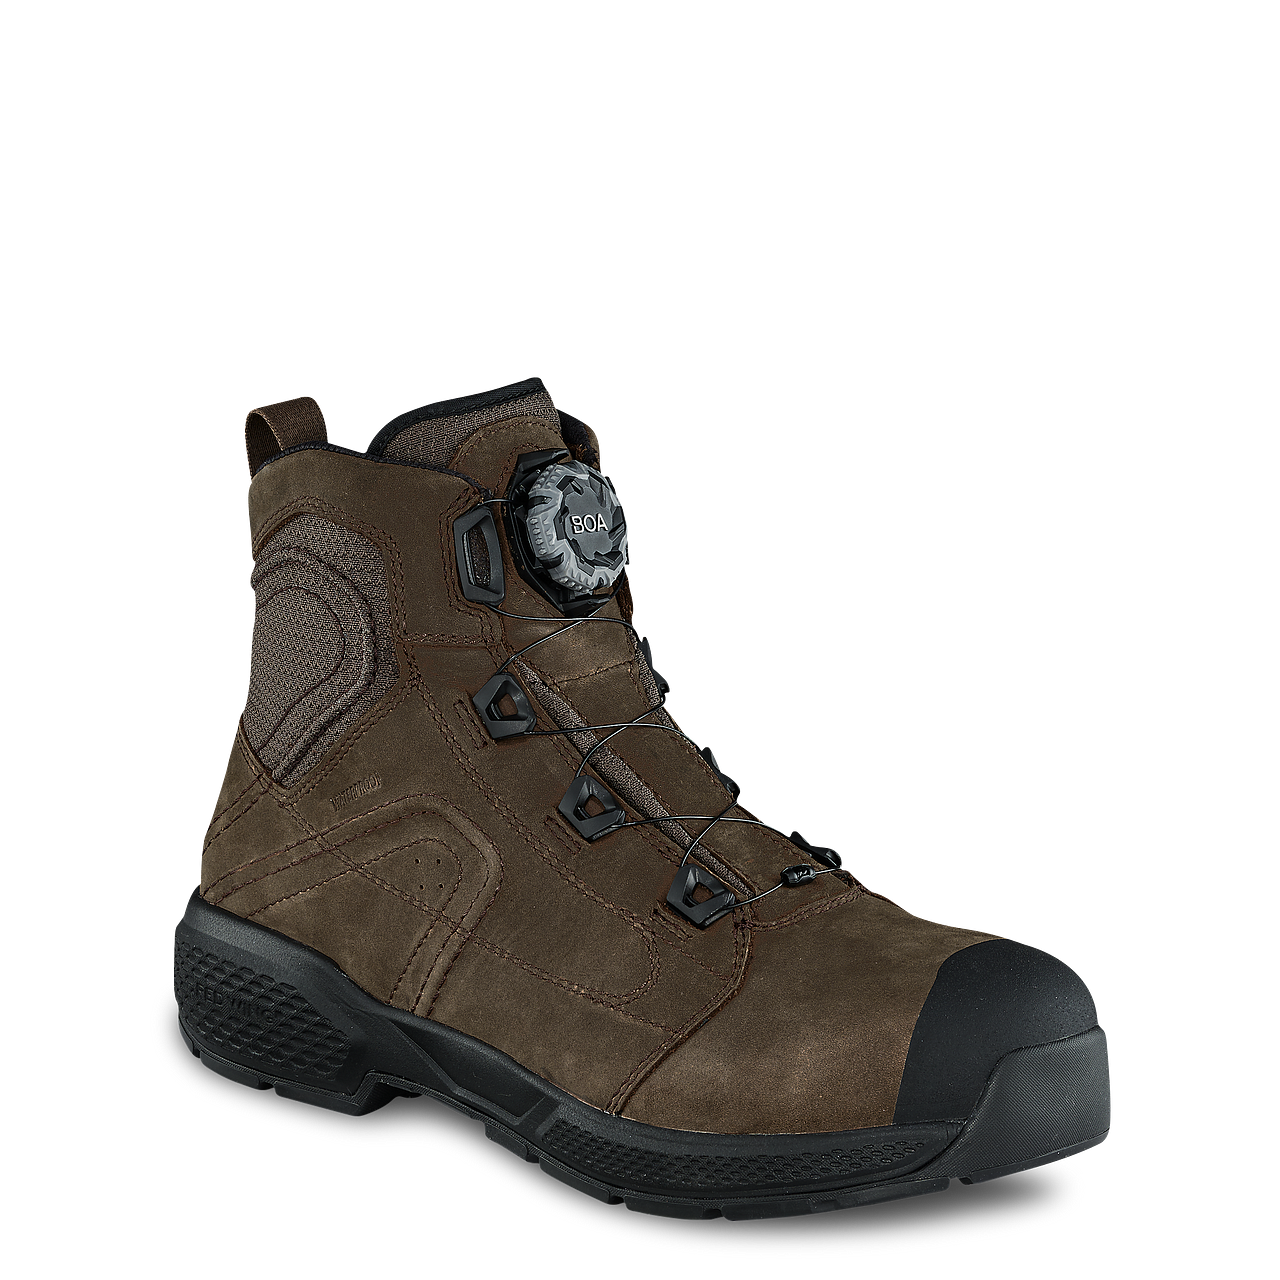 Red Wing 2453 Exos Lite 6-Inch Waterproof Safety Toe Boot